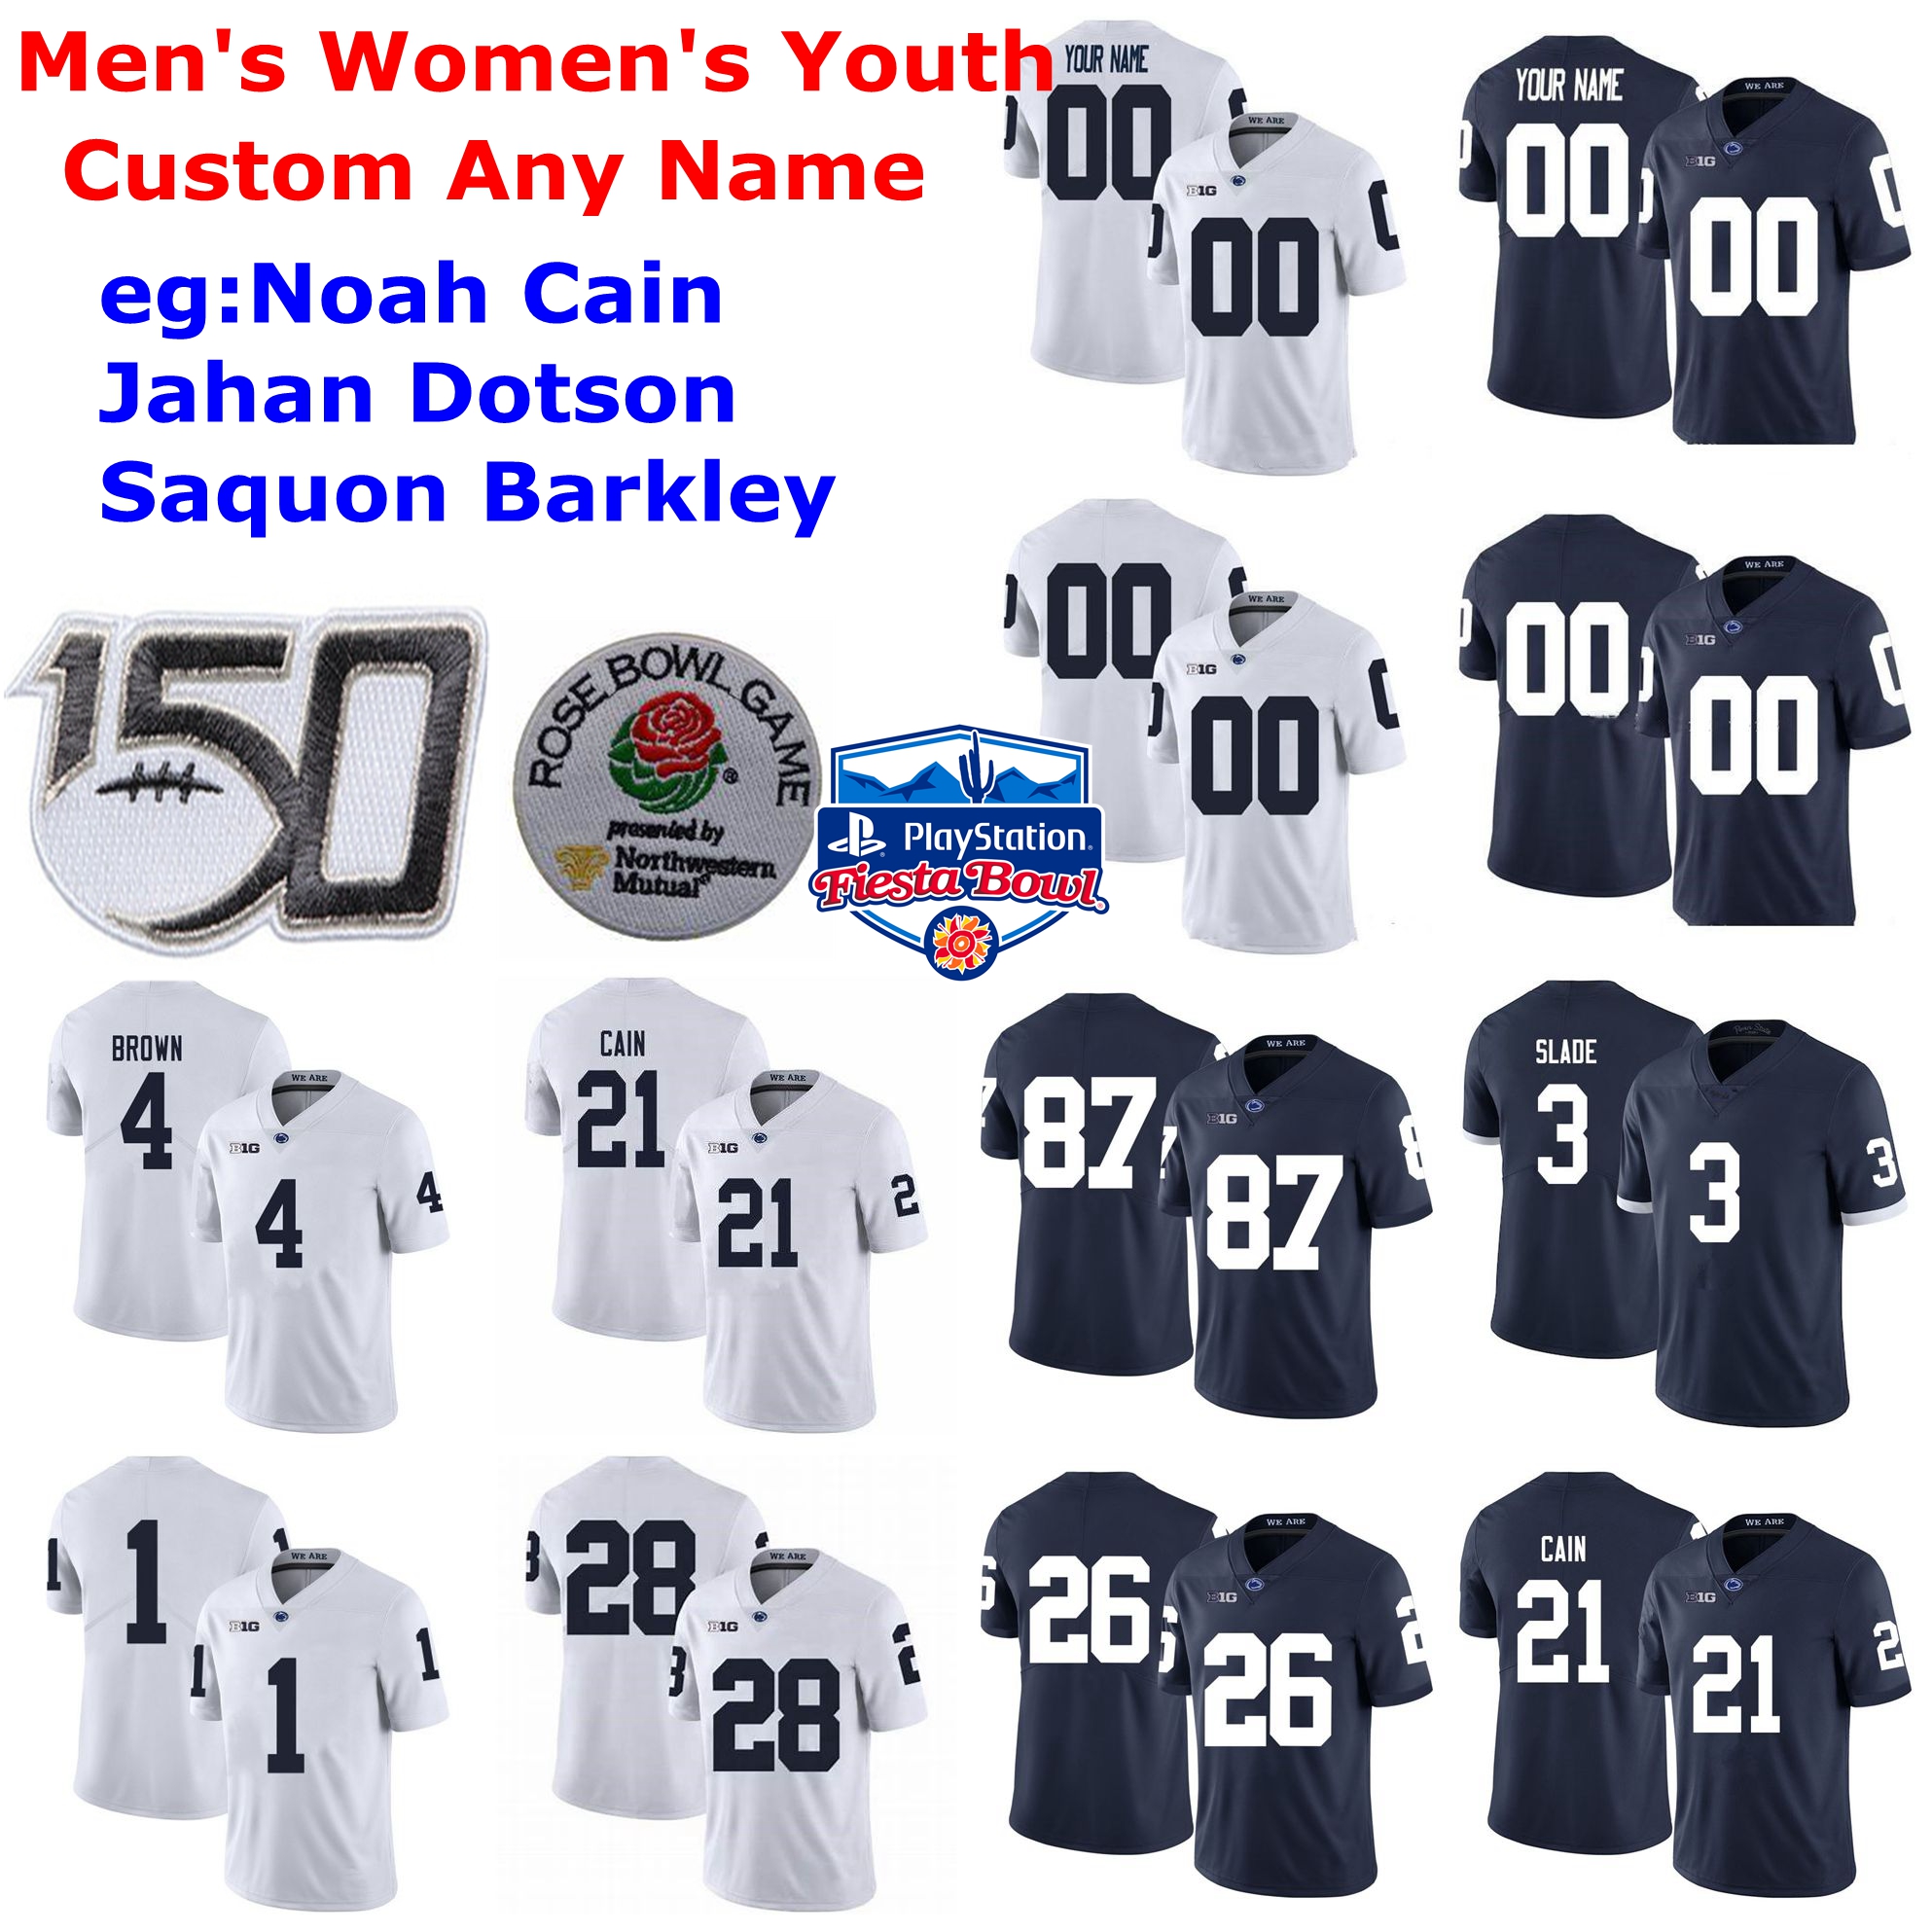 

Penn State Nittany Lions Jerseys Devyn Ford Jersey Micah Parsons Pat Freiermuth Miles Sanders Ricky Slade Football Jerseys Custom Stitched, Men's blue name with 150th